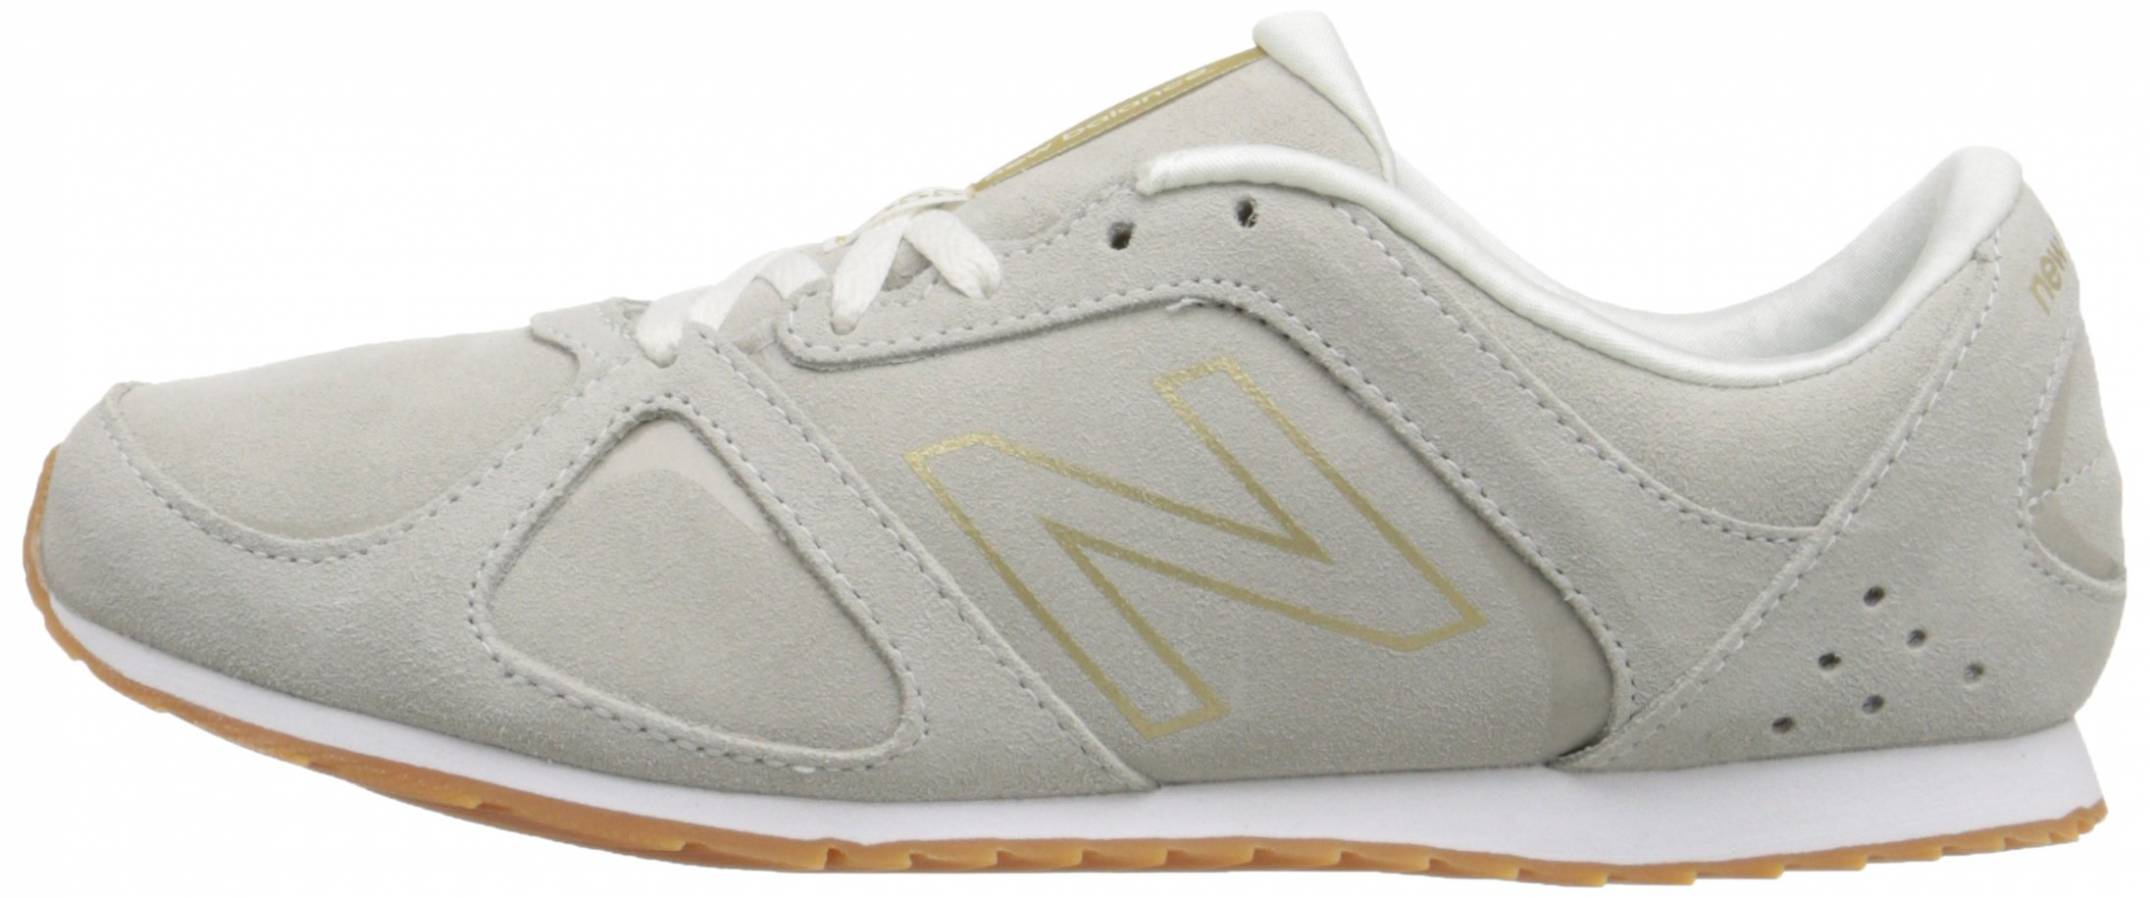 New Balance 555 sneakers in grey 